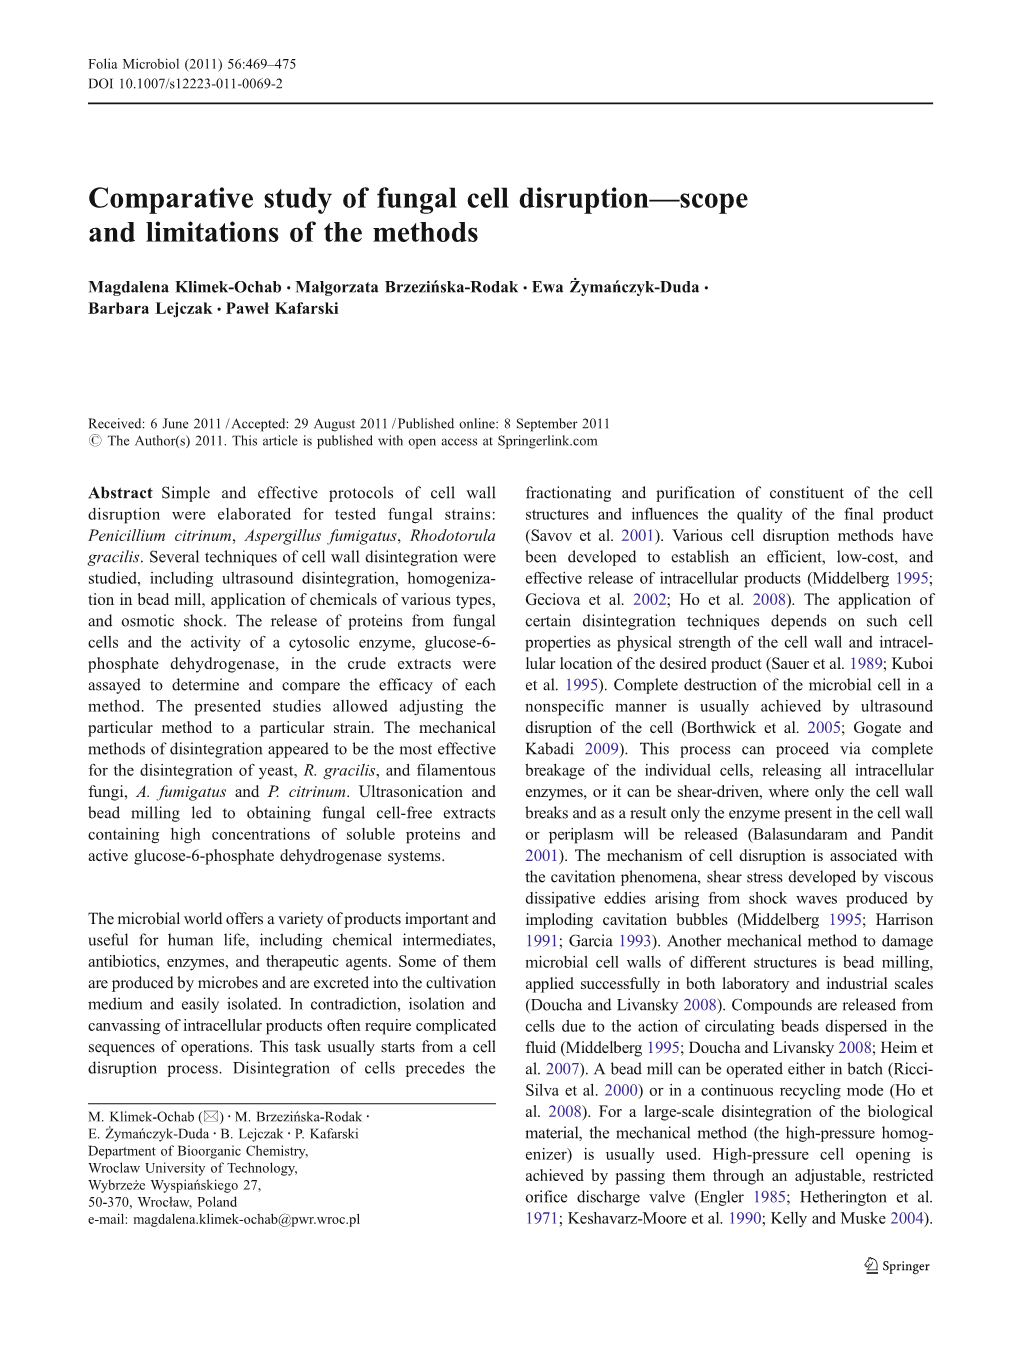 Comparative Study of Fungal Cell Disruption—Scope and Limitations of the Methods